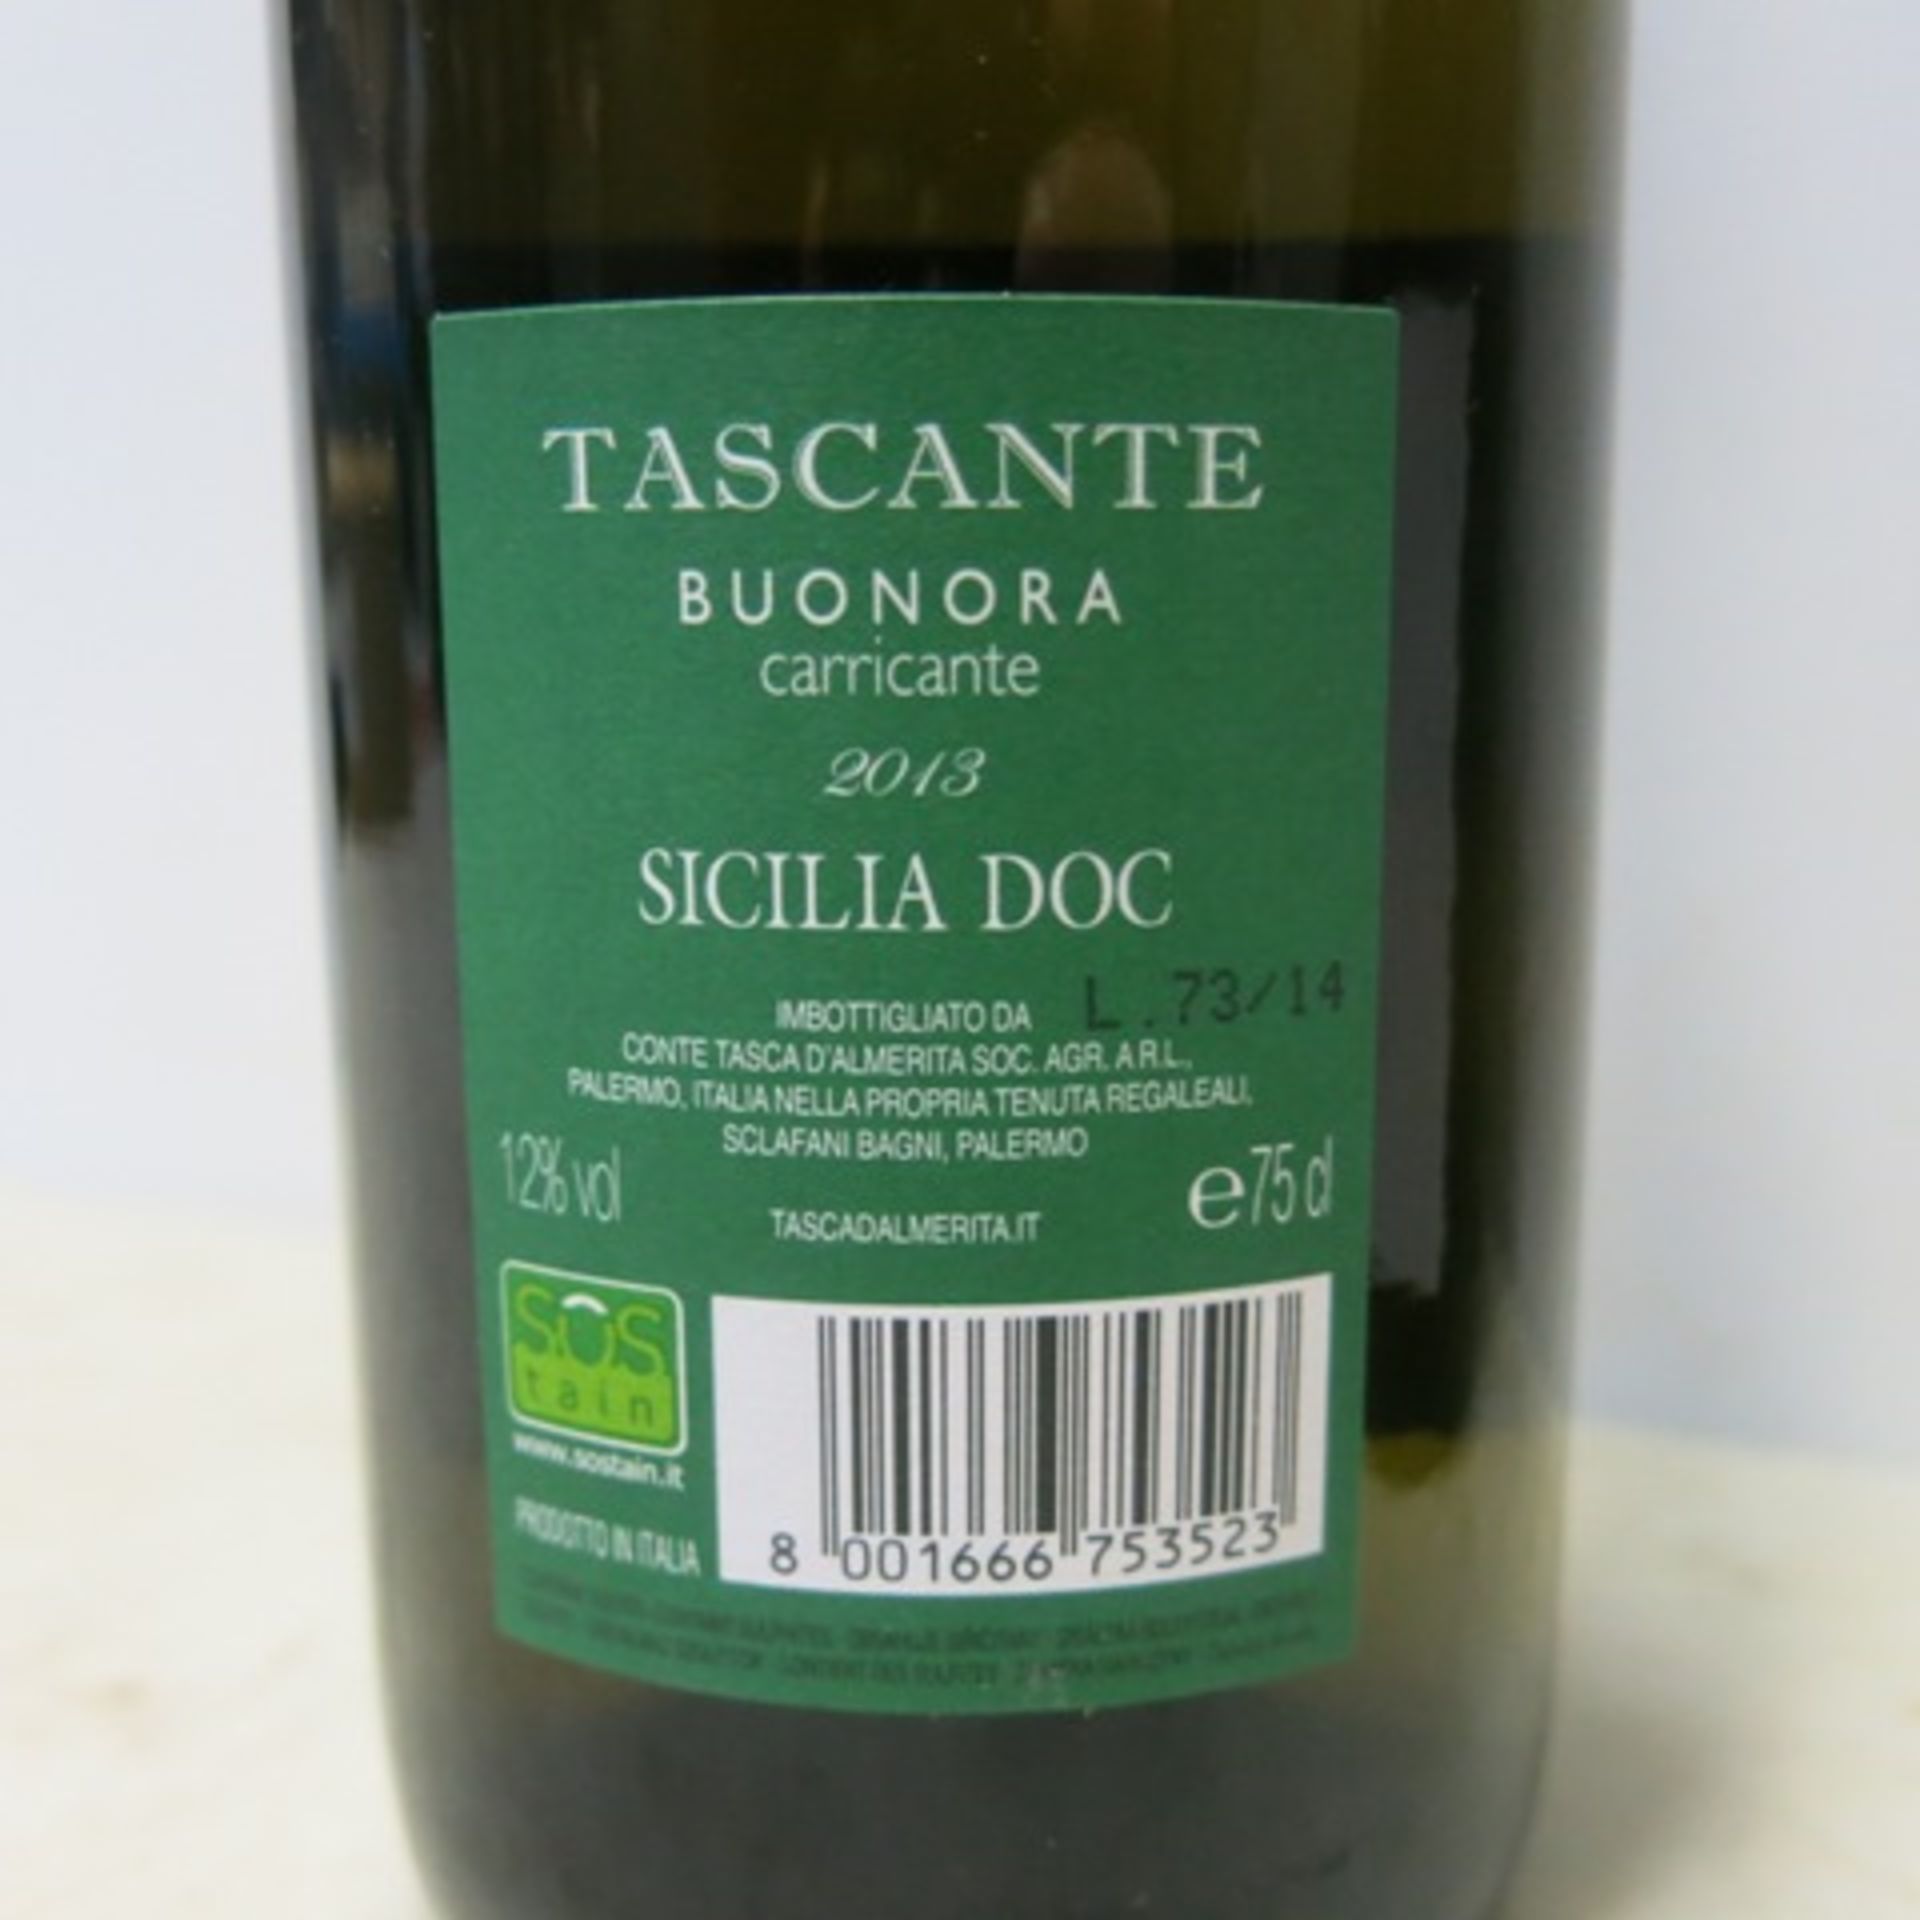 6 x Bottles of Tascante Buonora Carricante White Wine, Year 2013. Total RRP £120.00 - Image 3 of 3